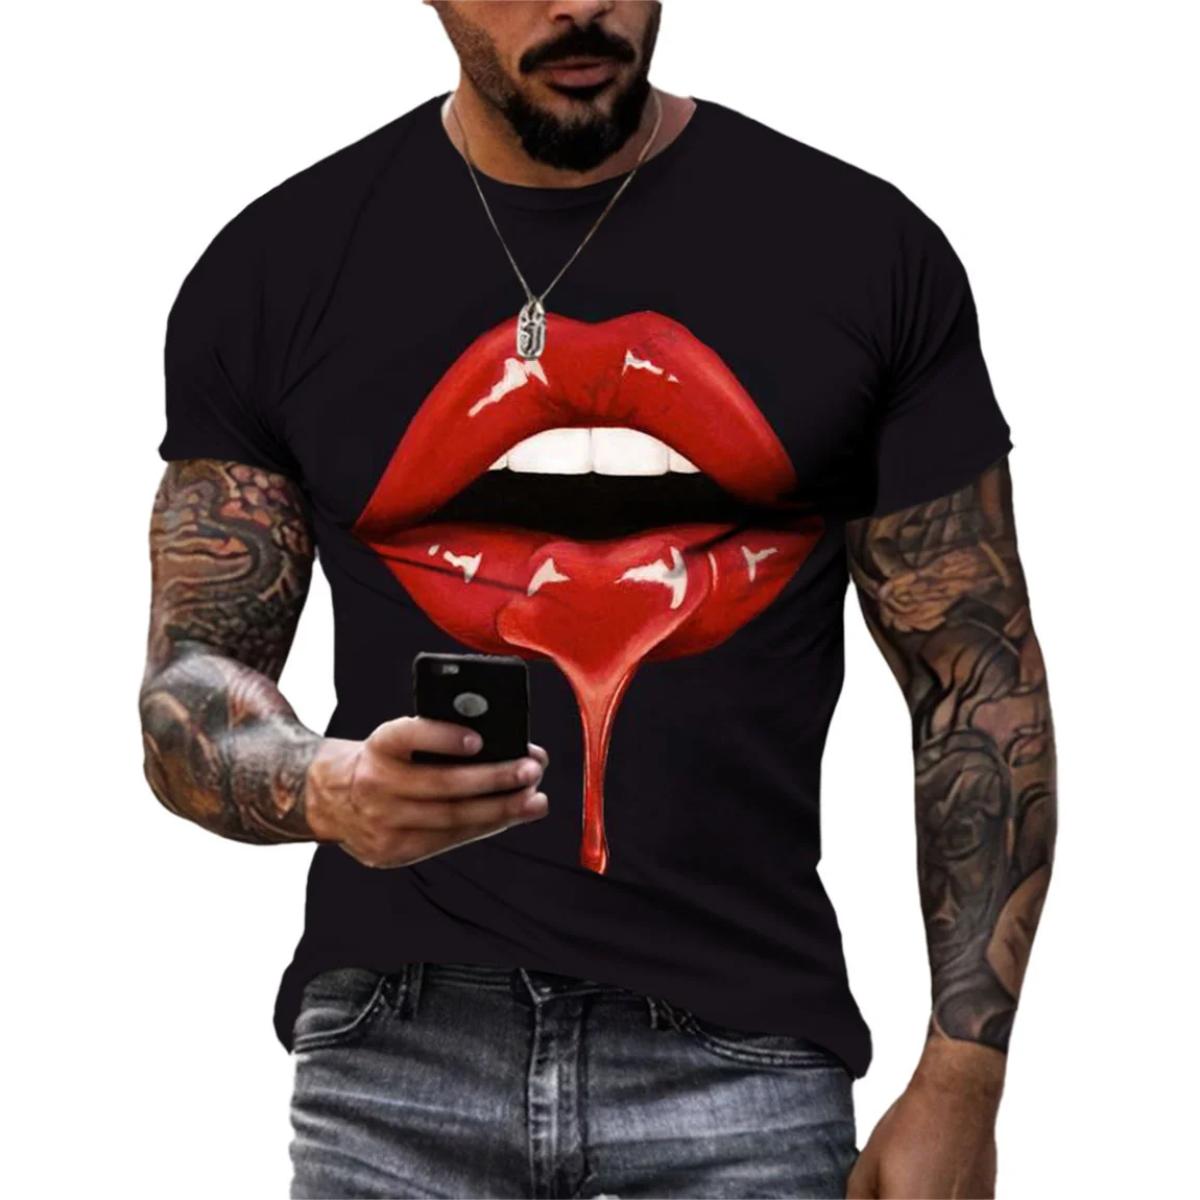 ETST WENDY T Shirt For Men 3D Printing Big Mouth Pattern Clothing Daily Fashion Leisure Sports Style Large Size Comfortable Male Tee Shirt